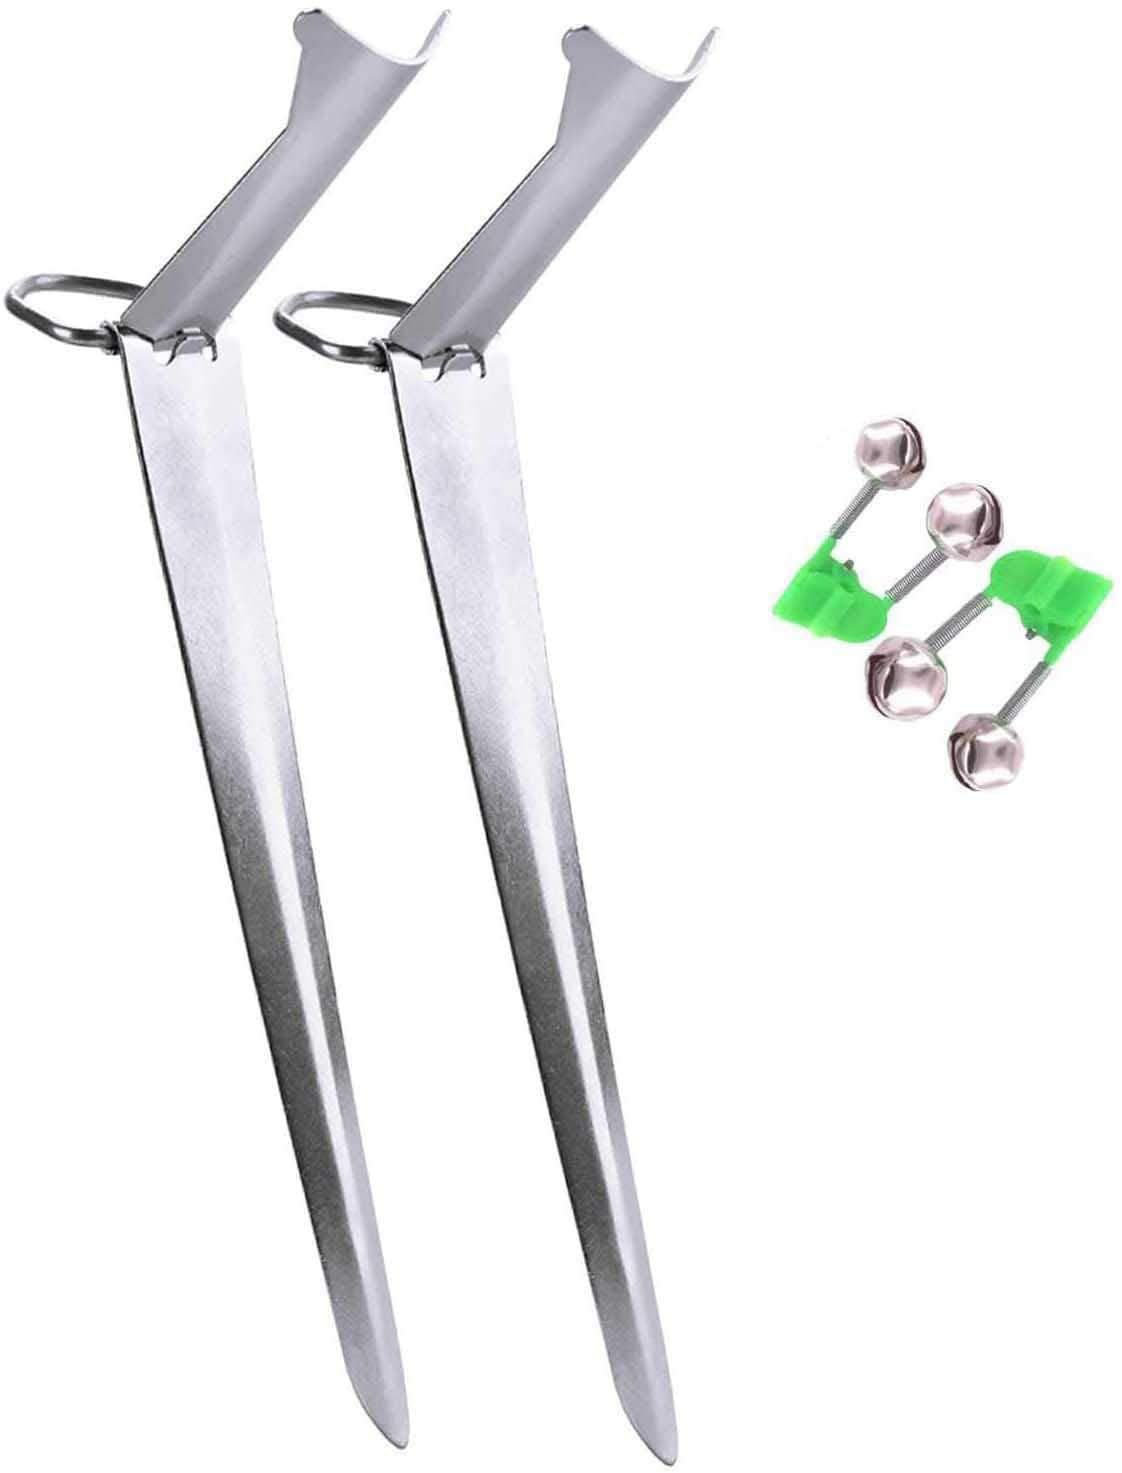 2 Packs Fishing Rod Holder Stainless Steel Ground Support Stand Fish Pole 